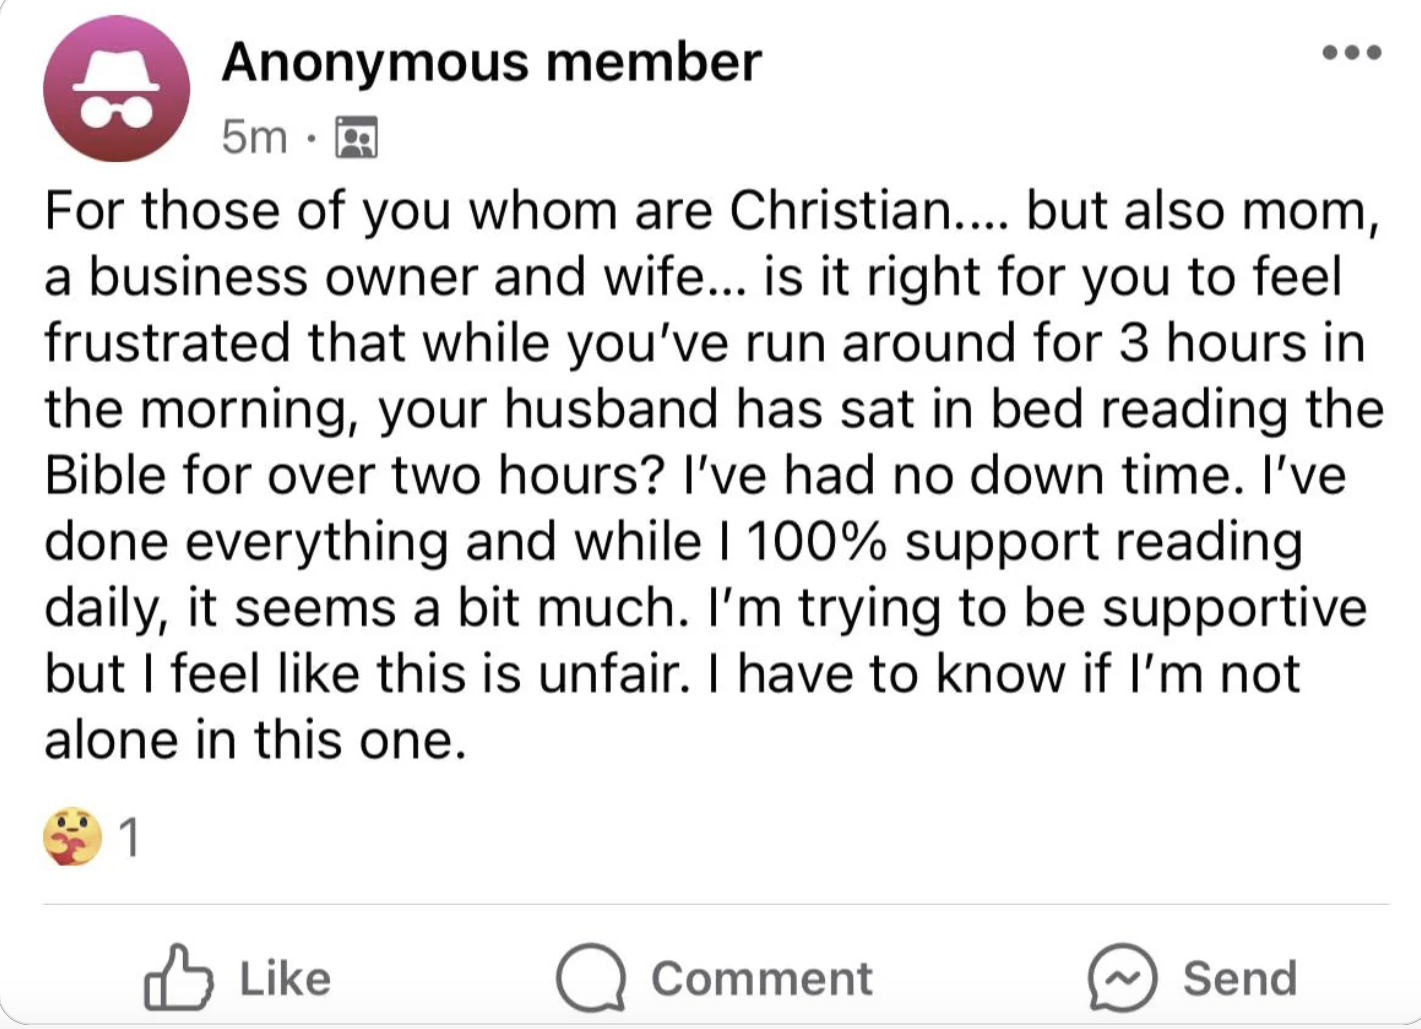 &quot;For those of you whom are Christian....&quot;